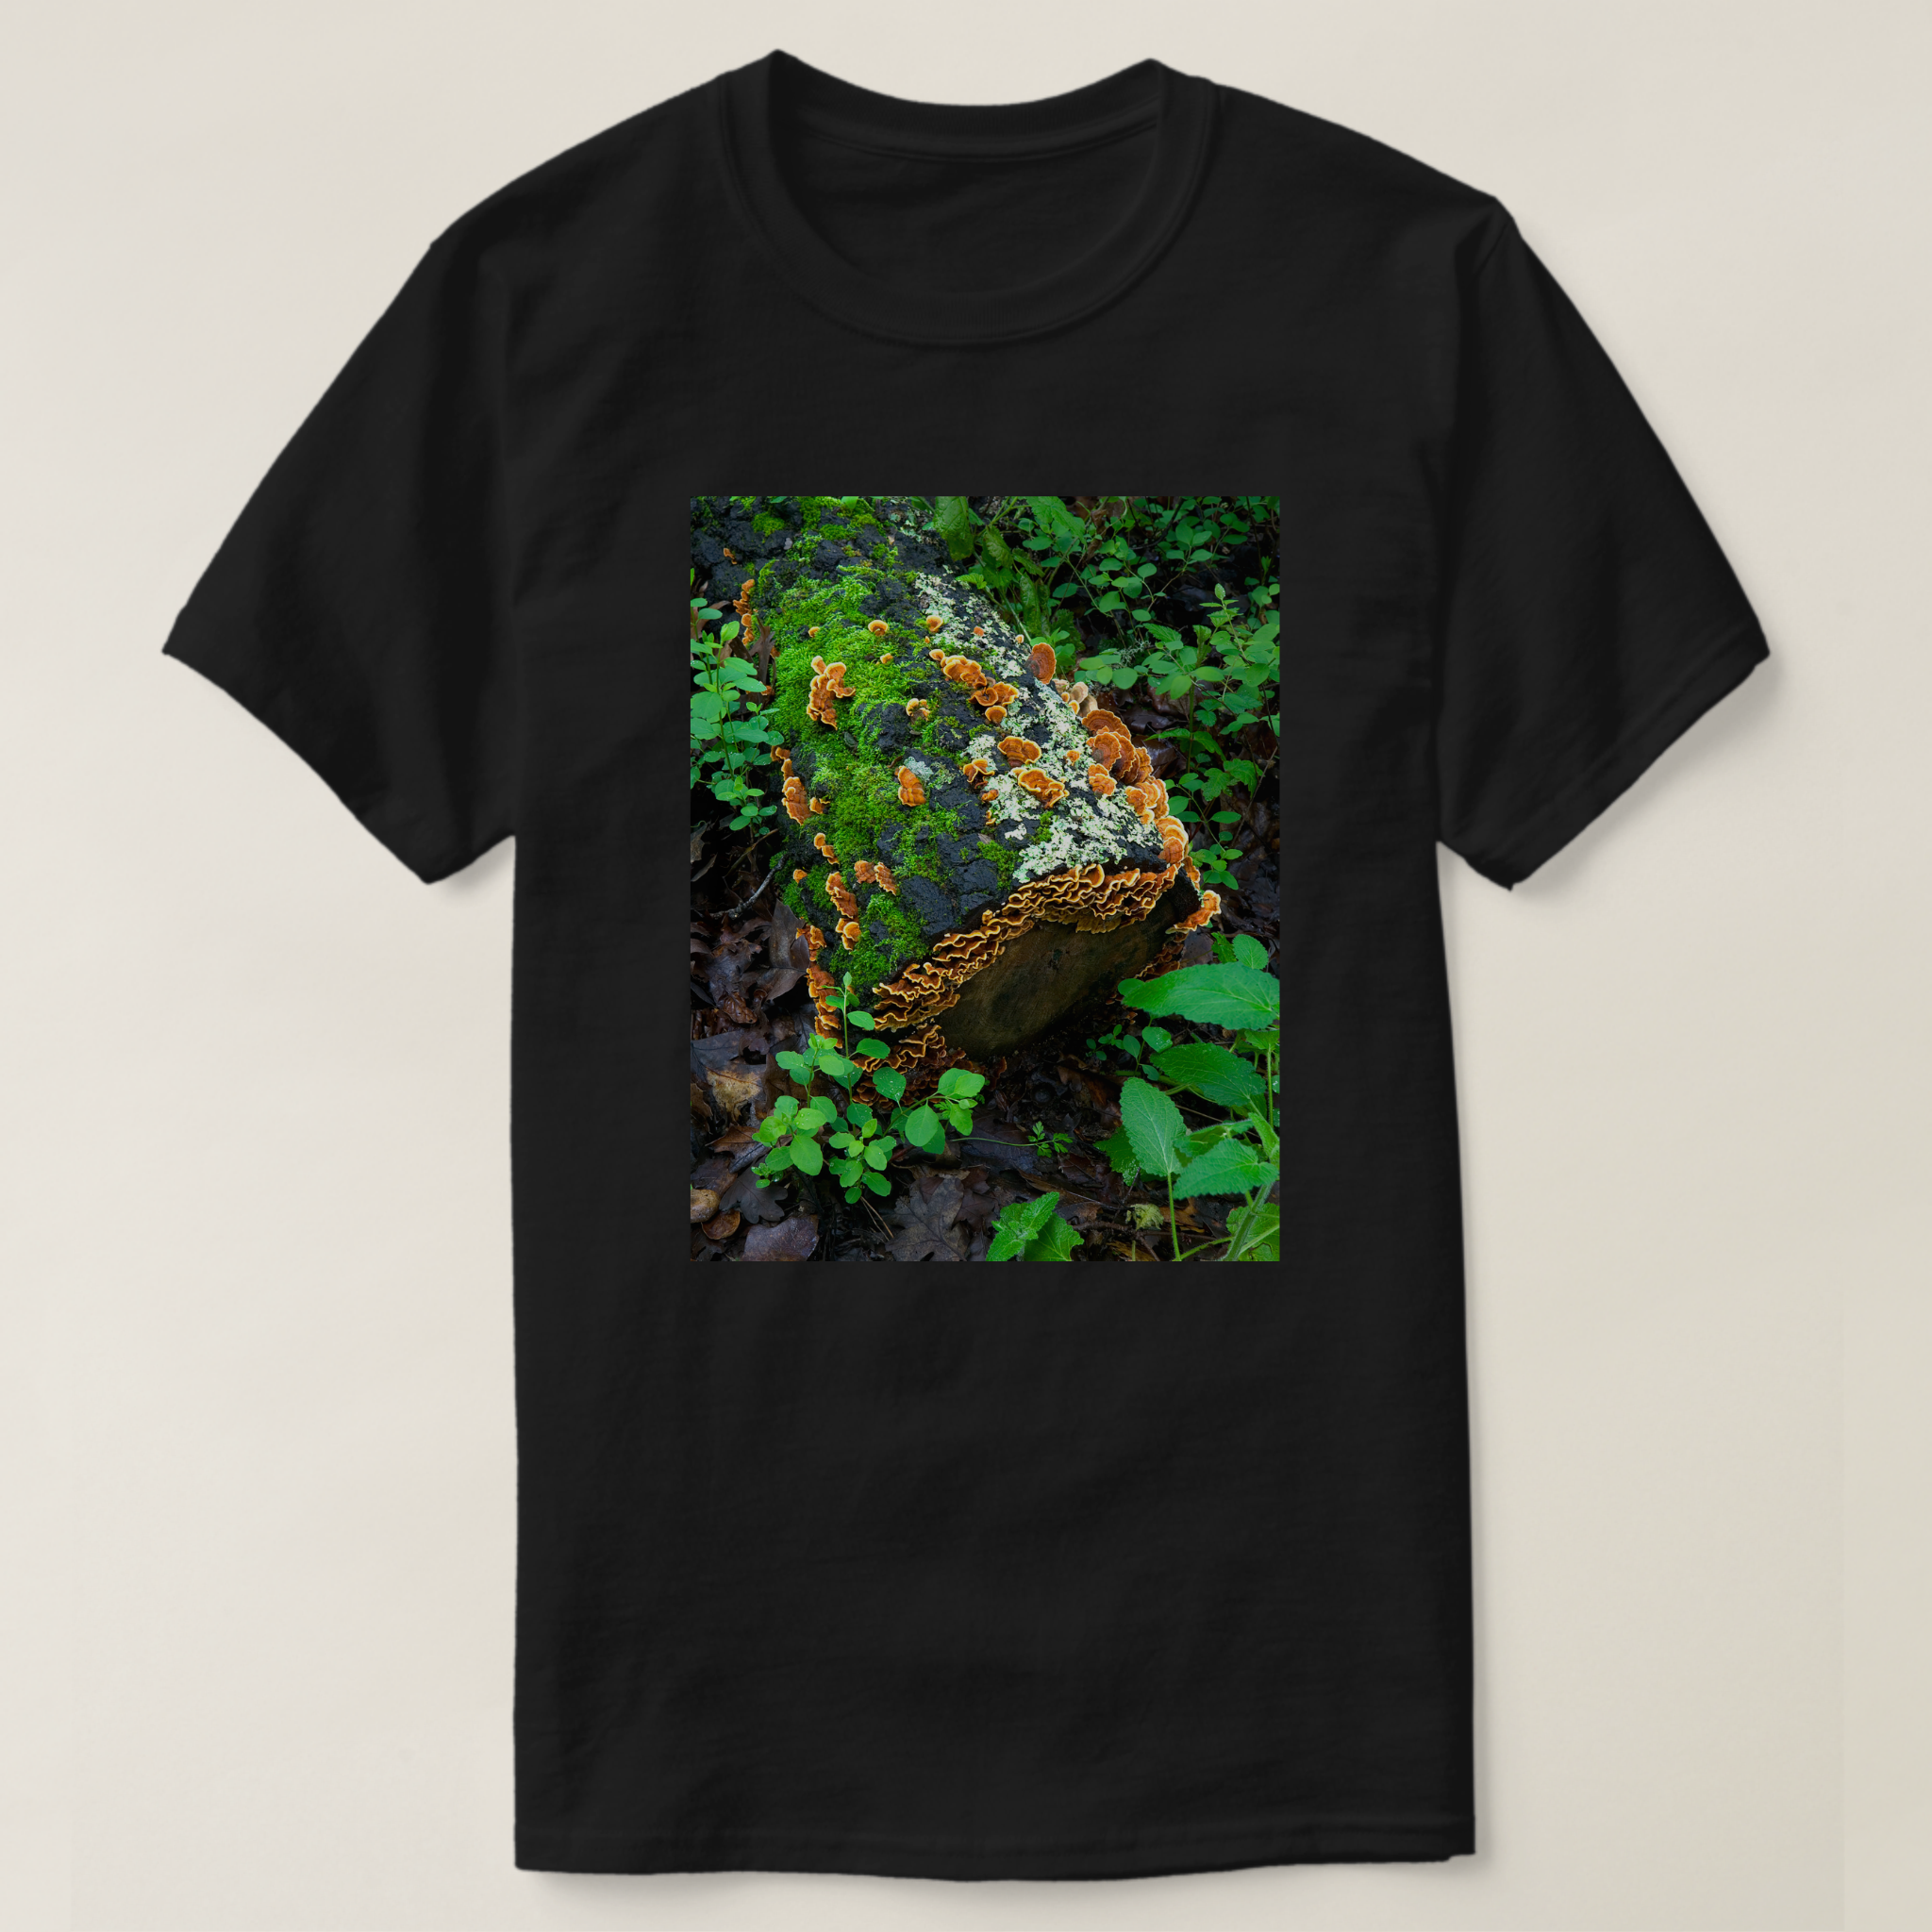 Zazzle - Mockup - Nature art %22All dressed up and nowhere to go%22  T-Shirt.png